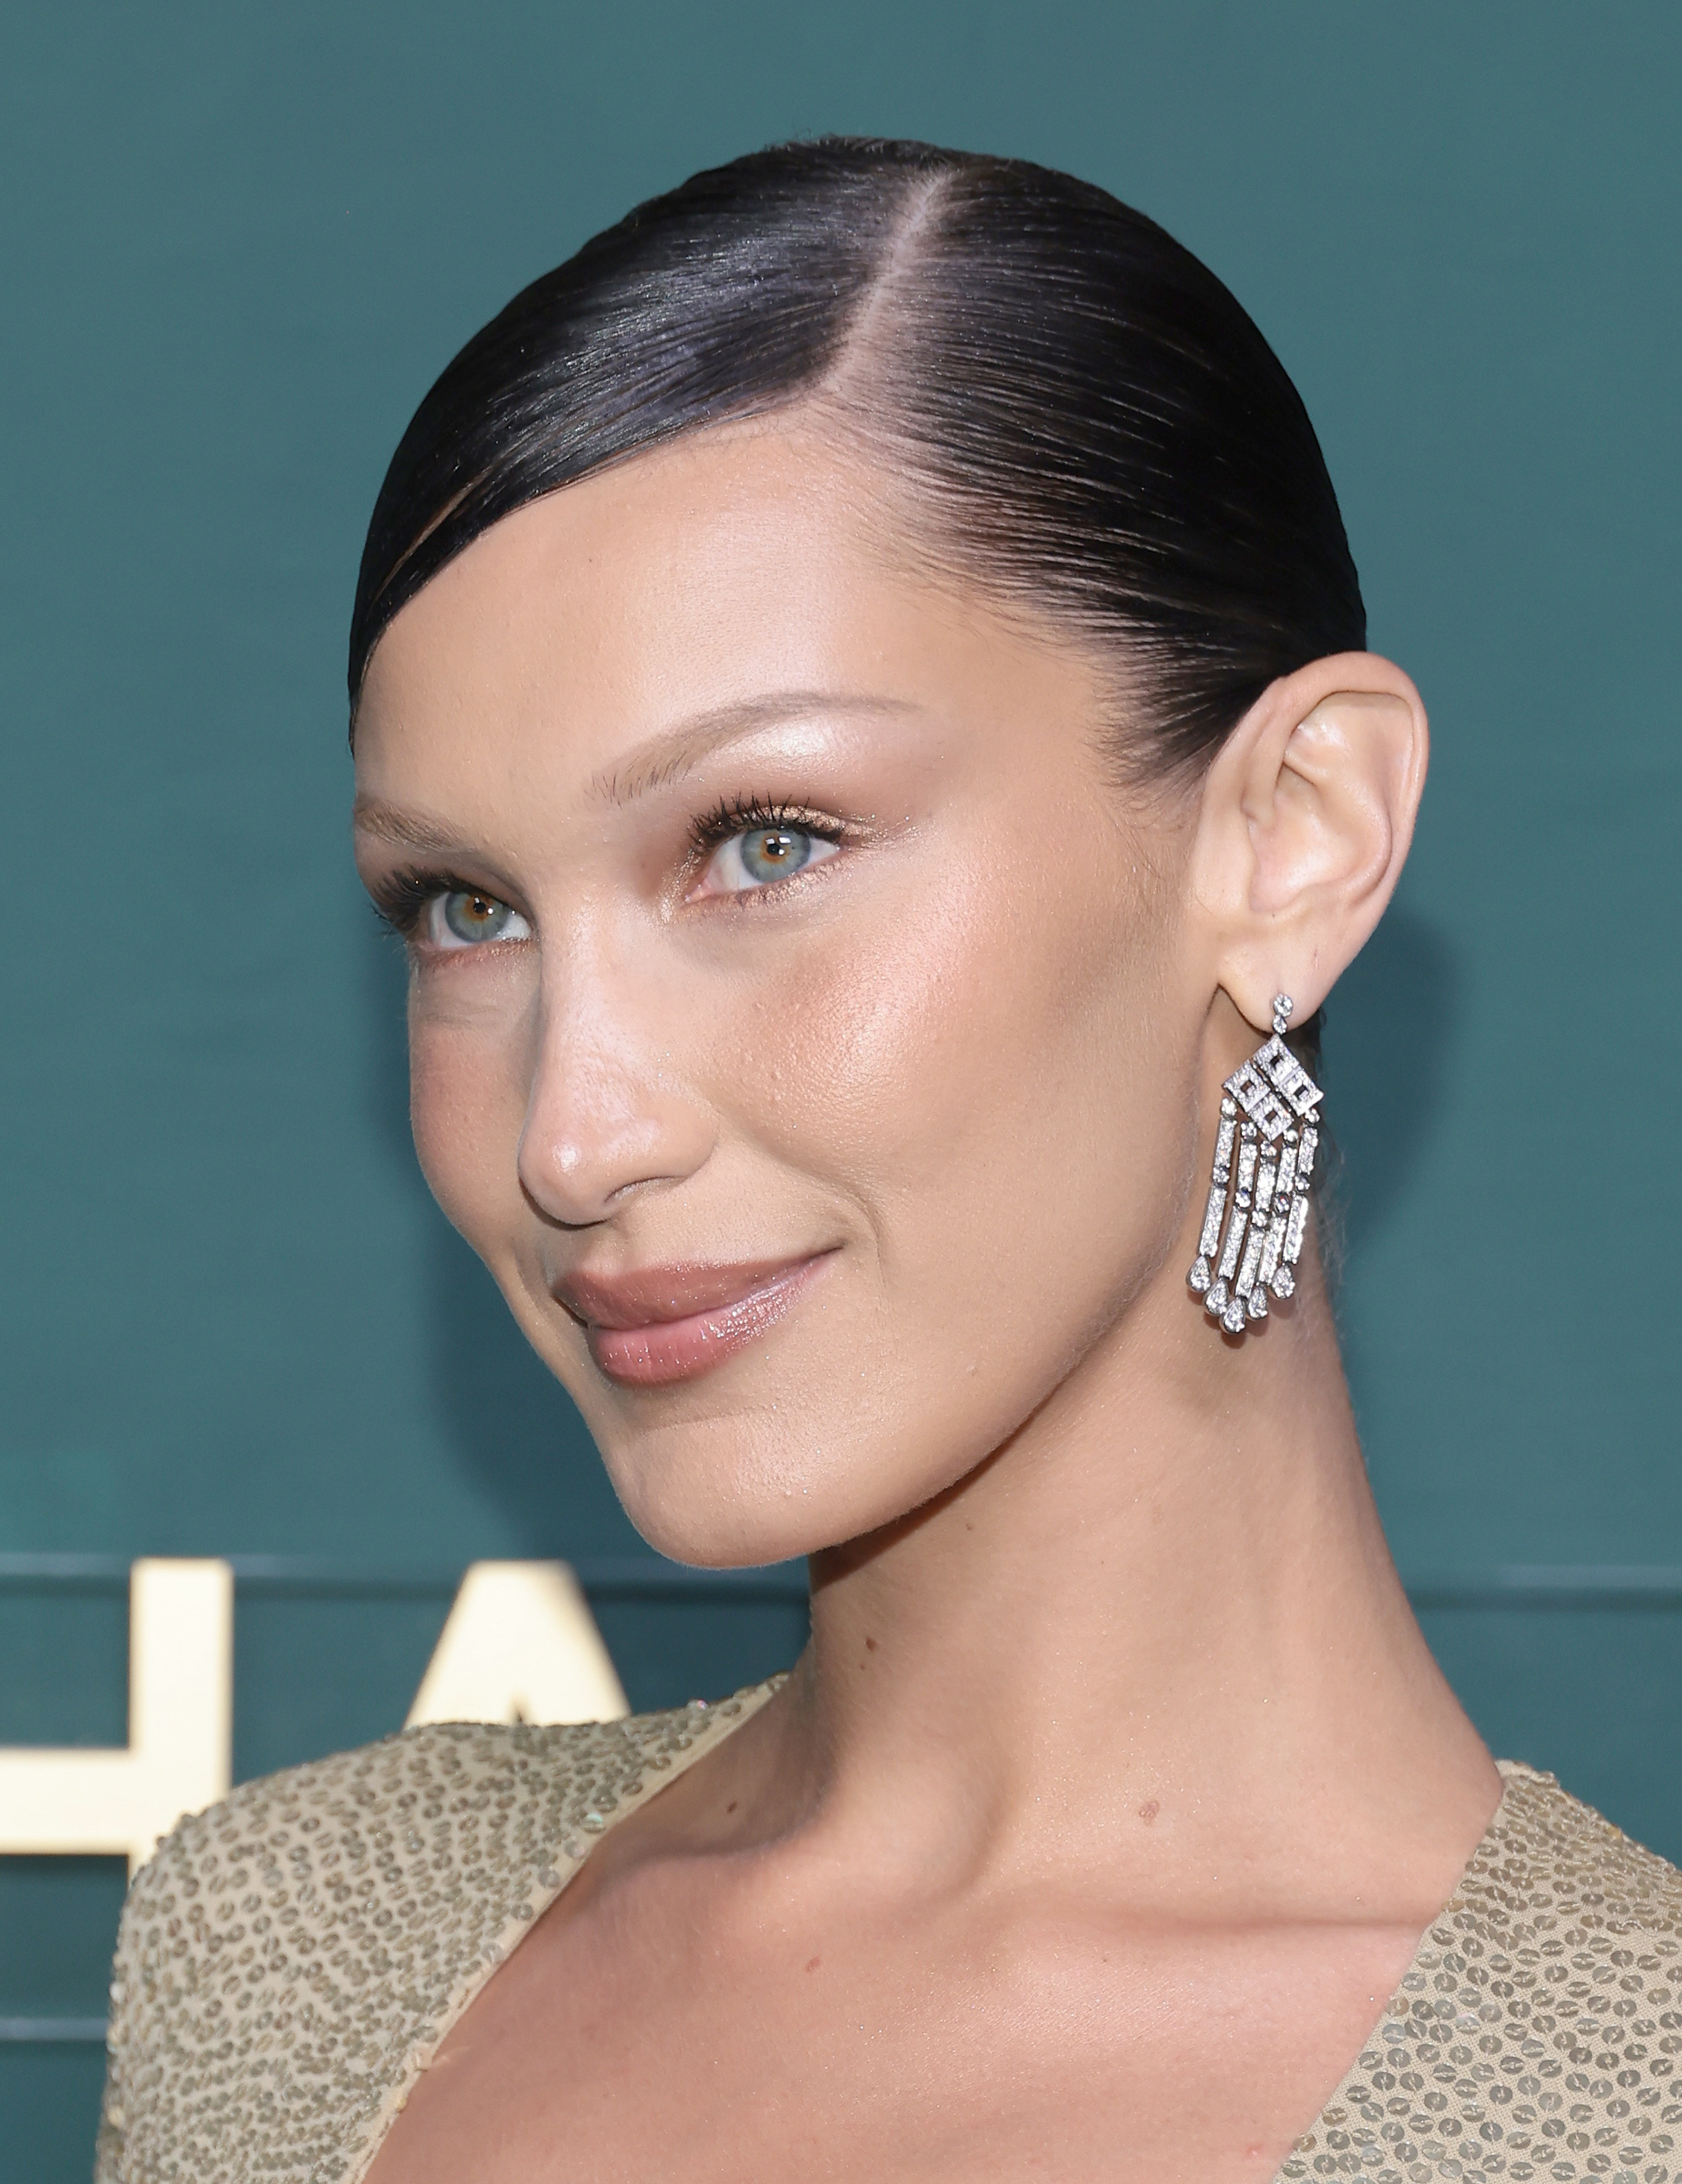 A close-up photo of Bella Hadid smiling with a slick bun, sequined shirt, and big diamond earrings